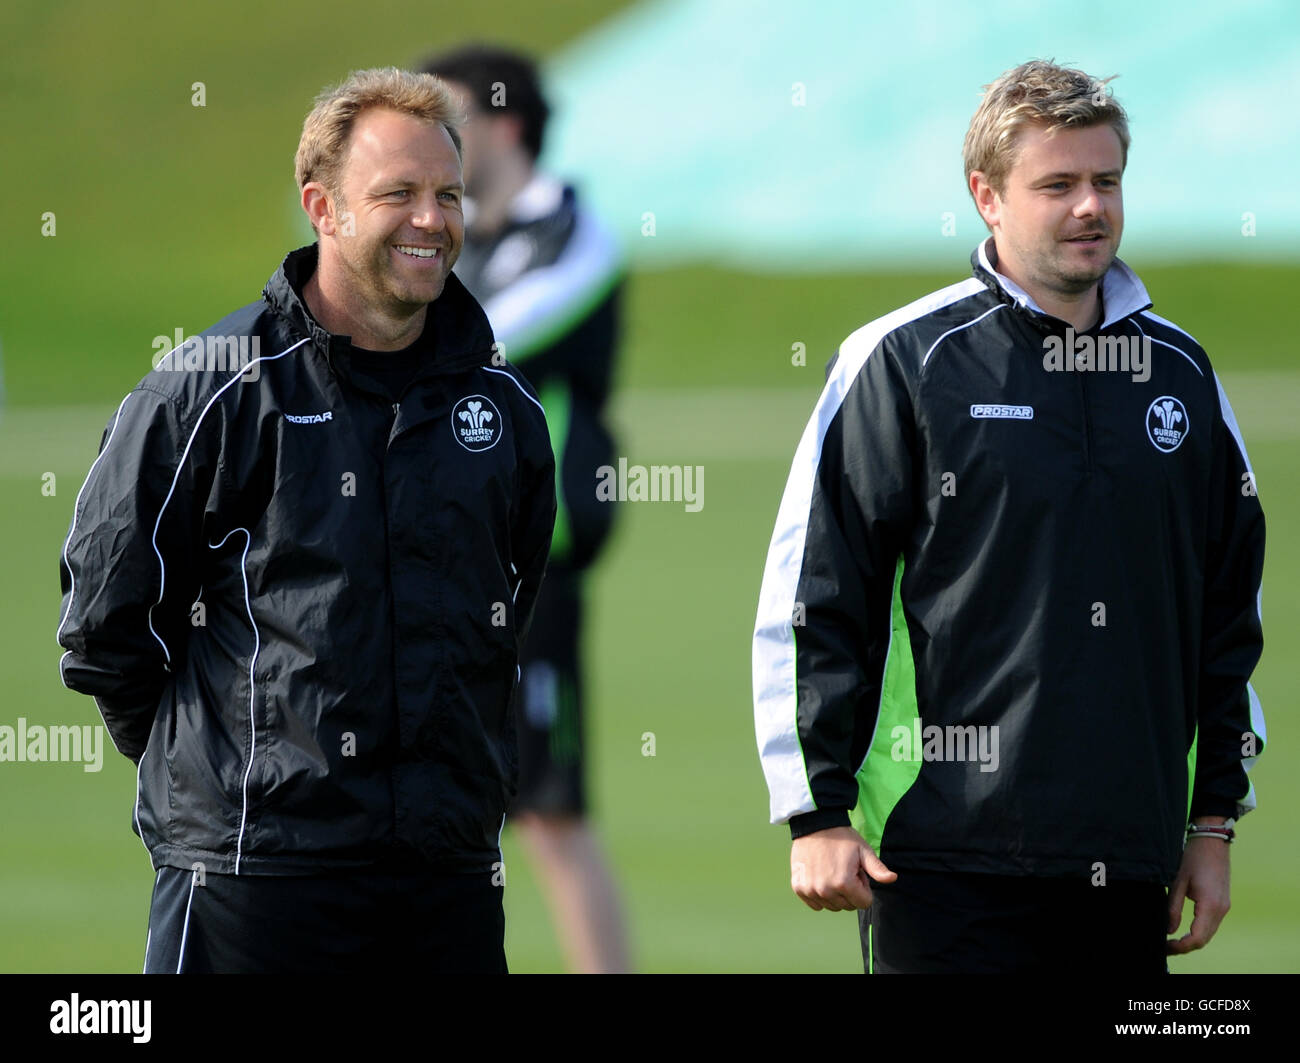 Surrey Head Coach Chris Adams (left) and Strength and Conditioning Coach Ashley Wright (right) Stock Photo